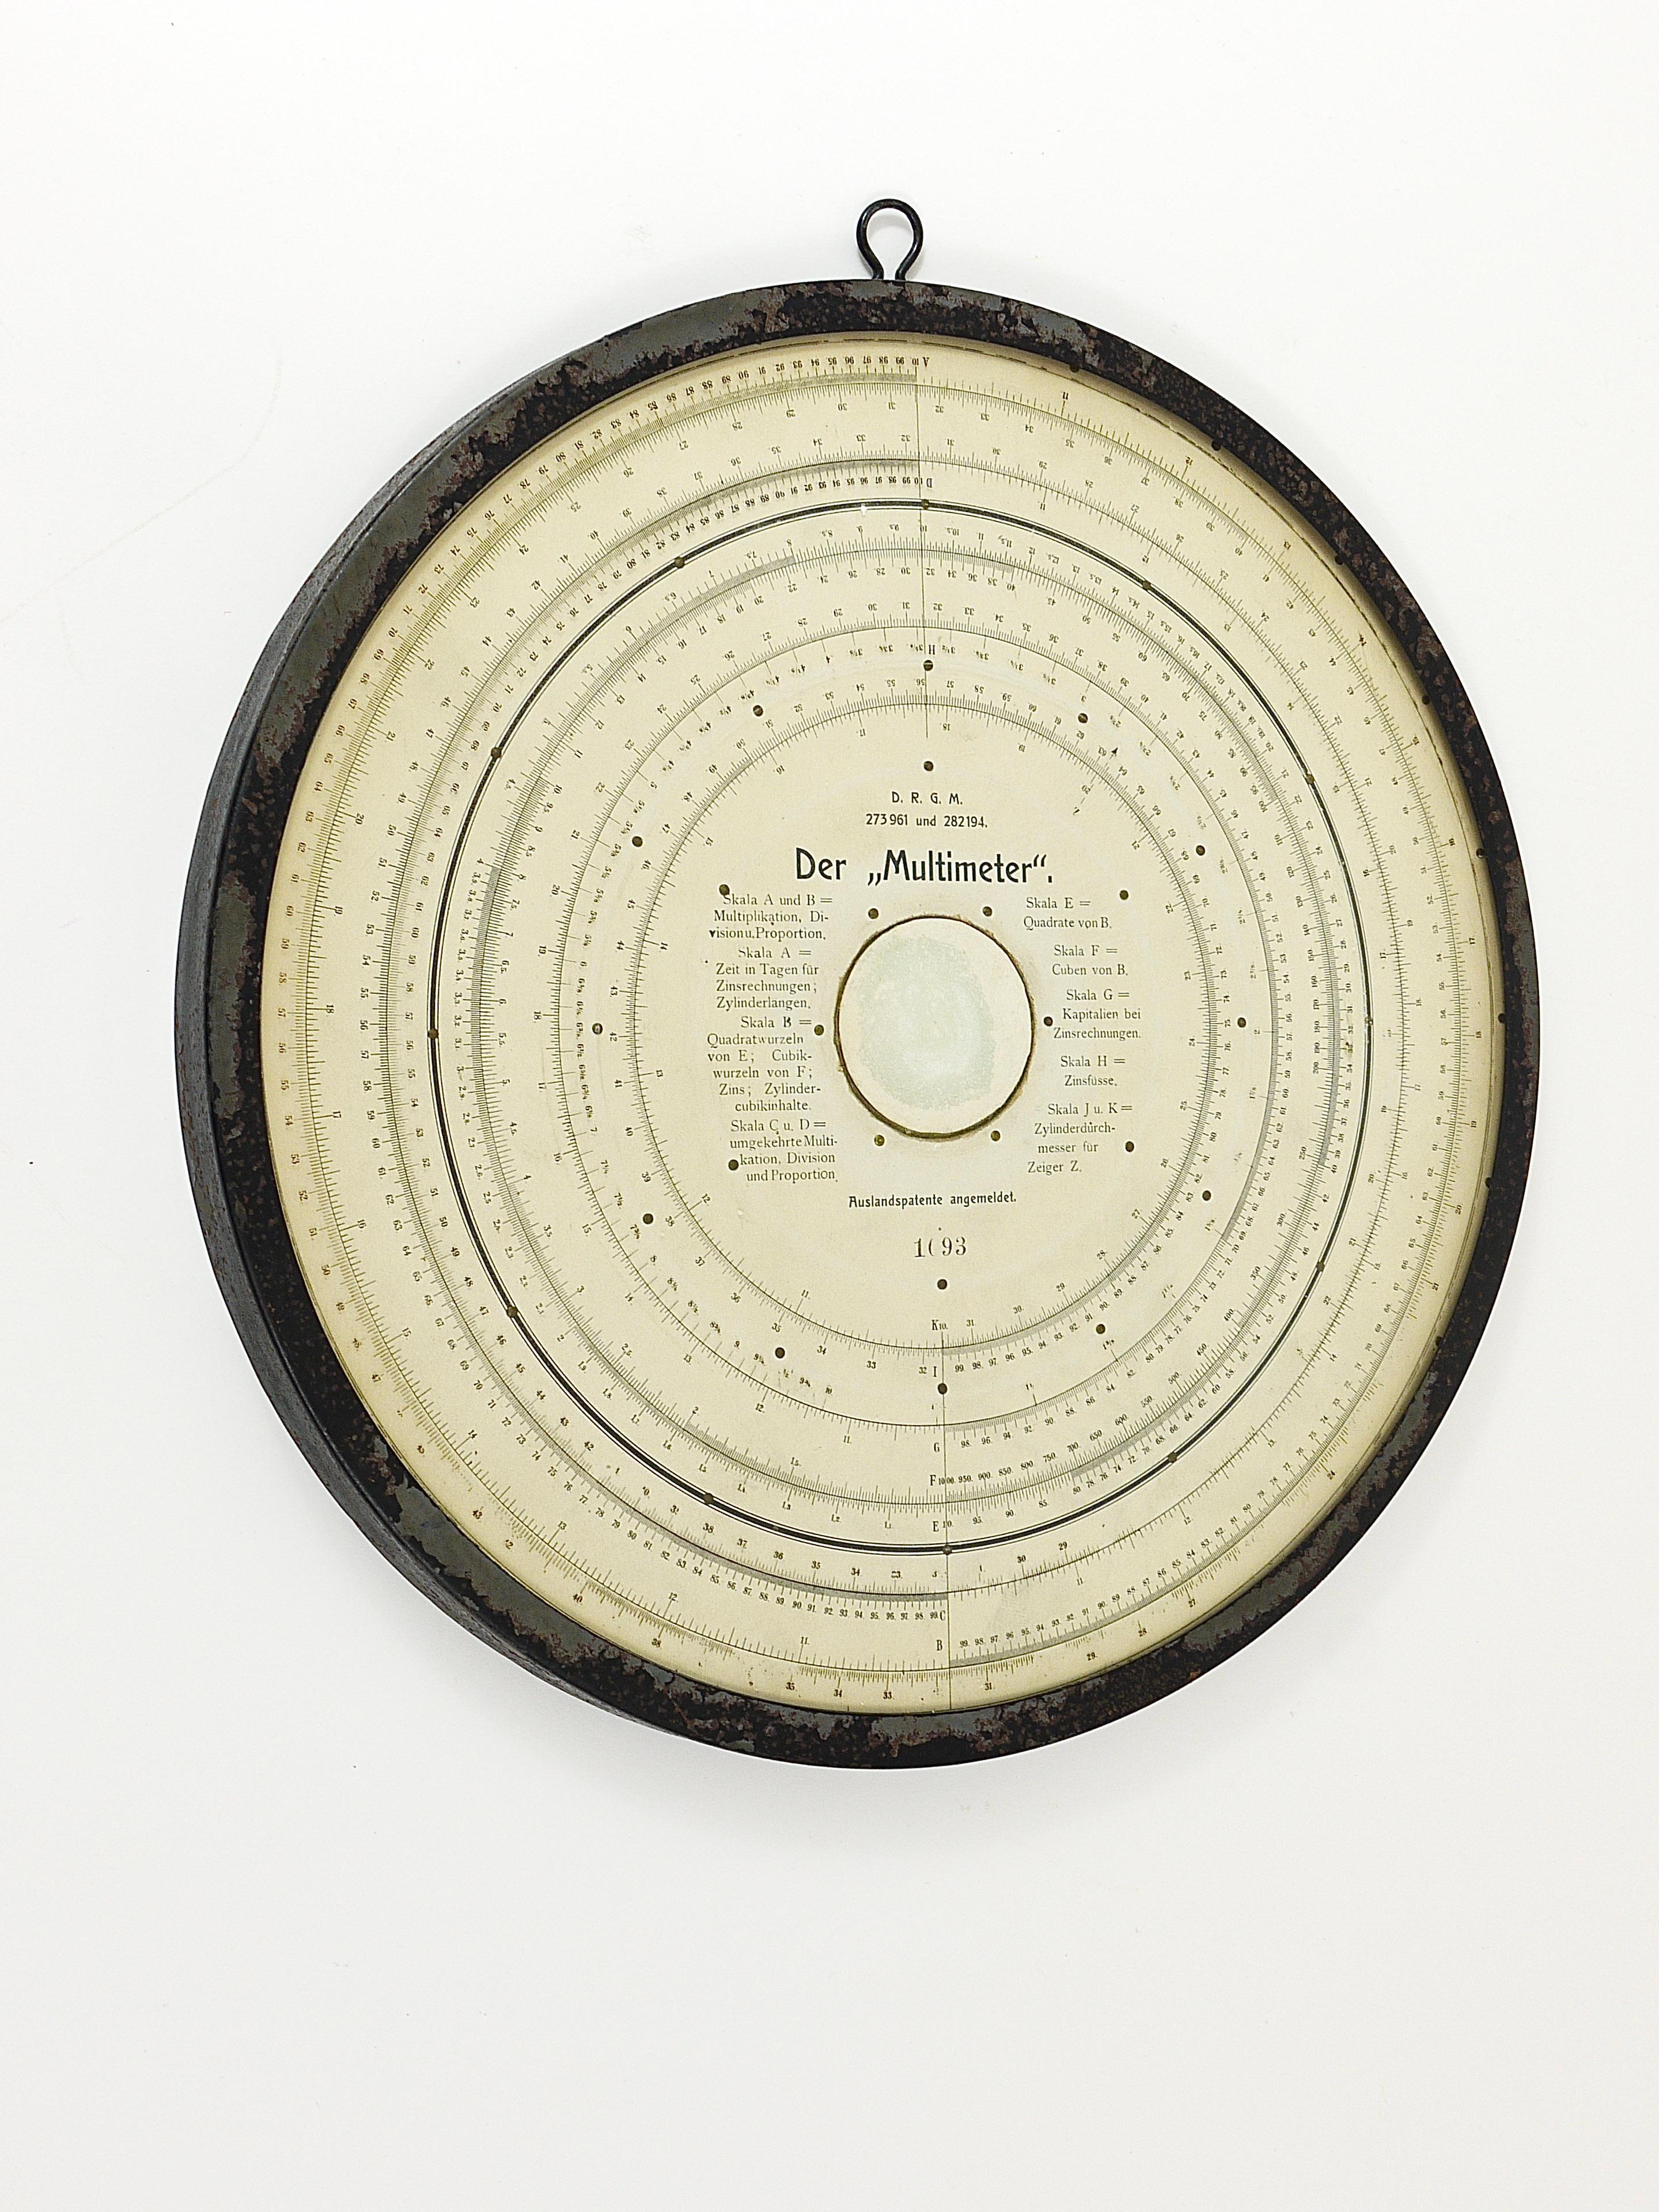 A dekorative appr. 120-year-old, large, wall-mounted round „Multimeter“ analog slide rule calculator. Dated around 1900, made in Germany. It has a rotatable glass disc and offers multiple features like multiplication, division, interest-calculation